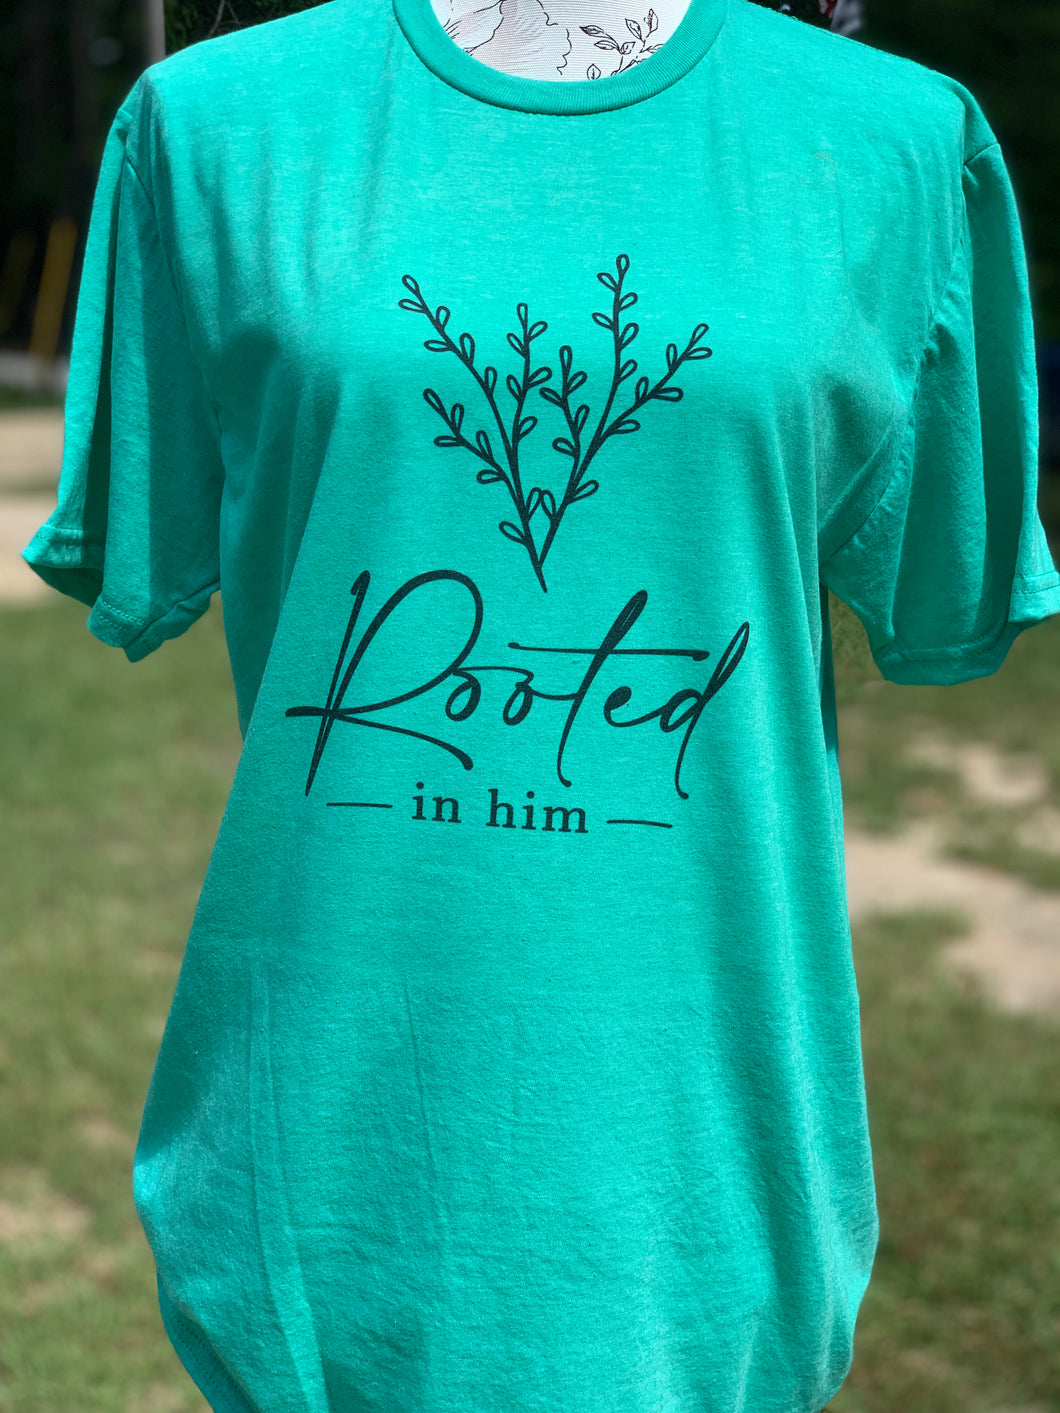 Rooted in Him- No bleach